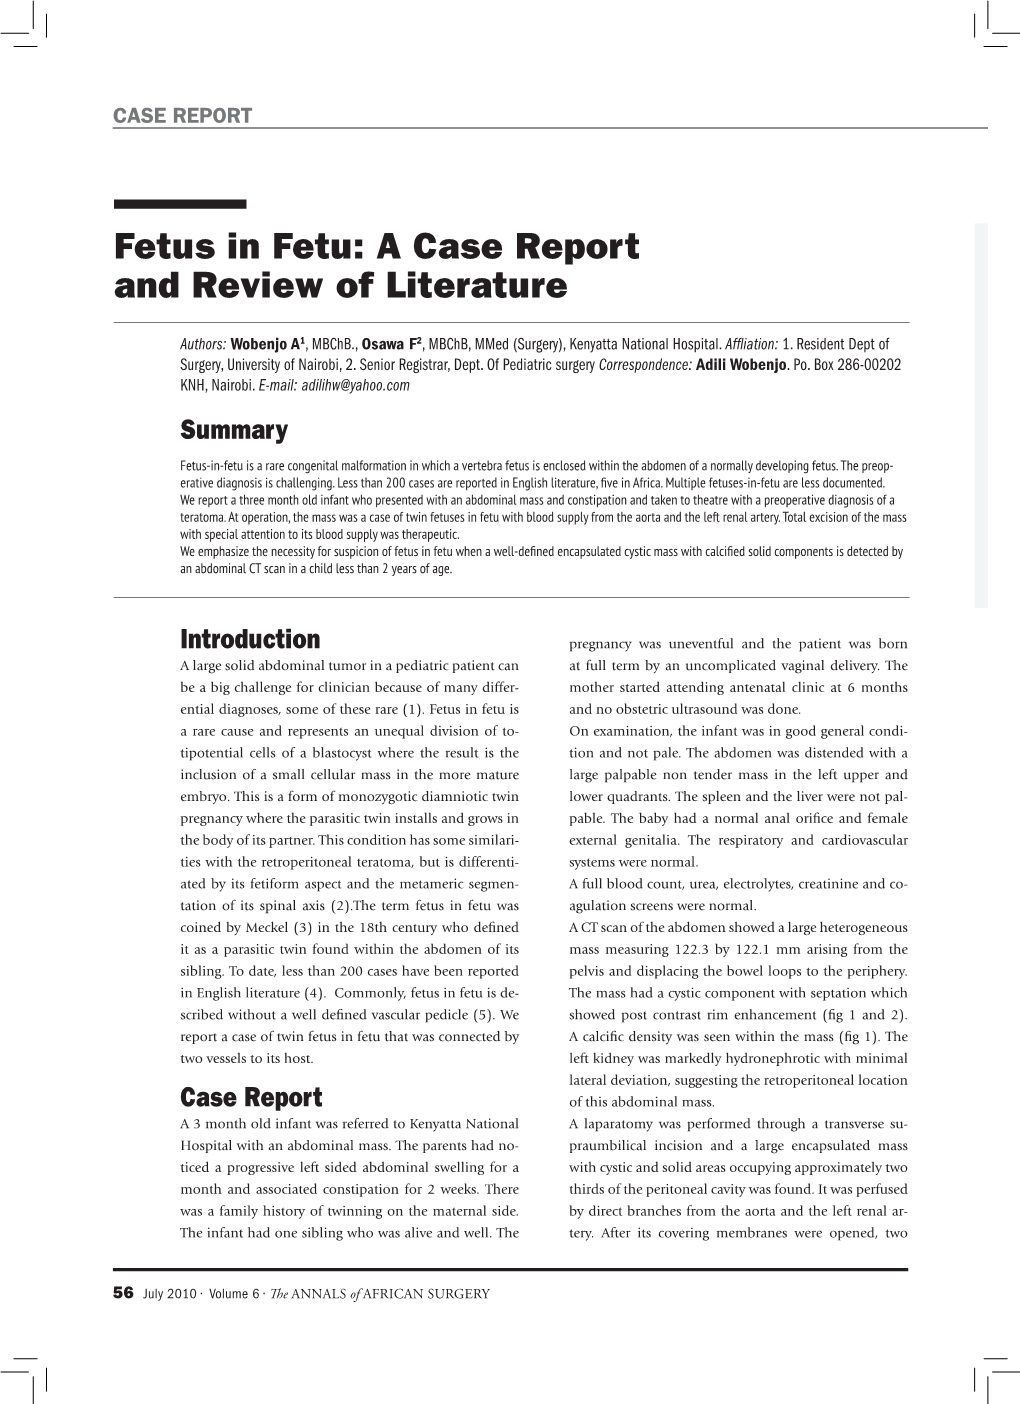 Fetus in Fetu: a Case Report and Review of Literature